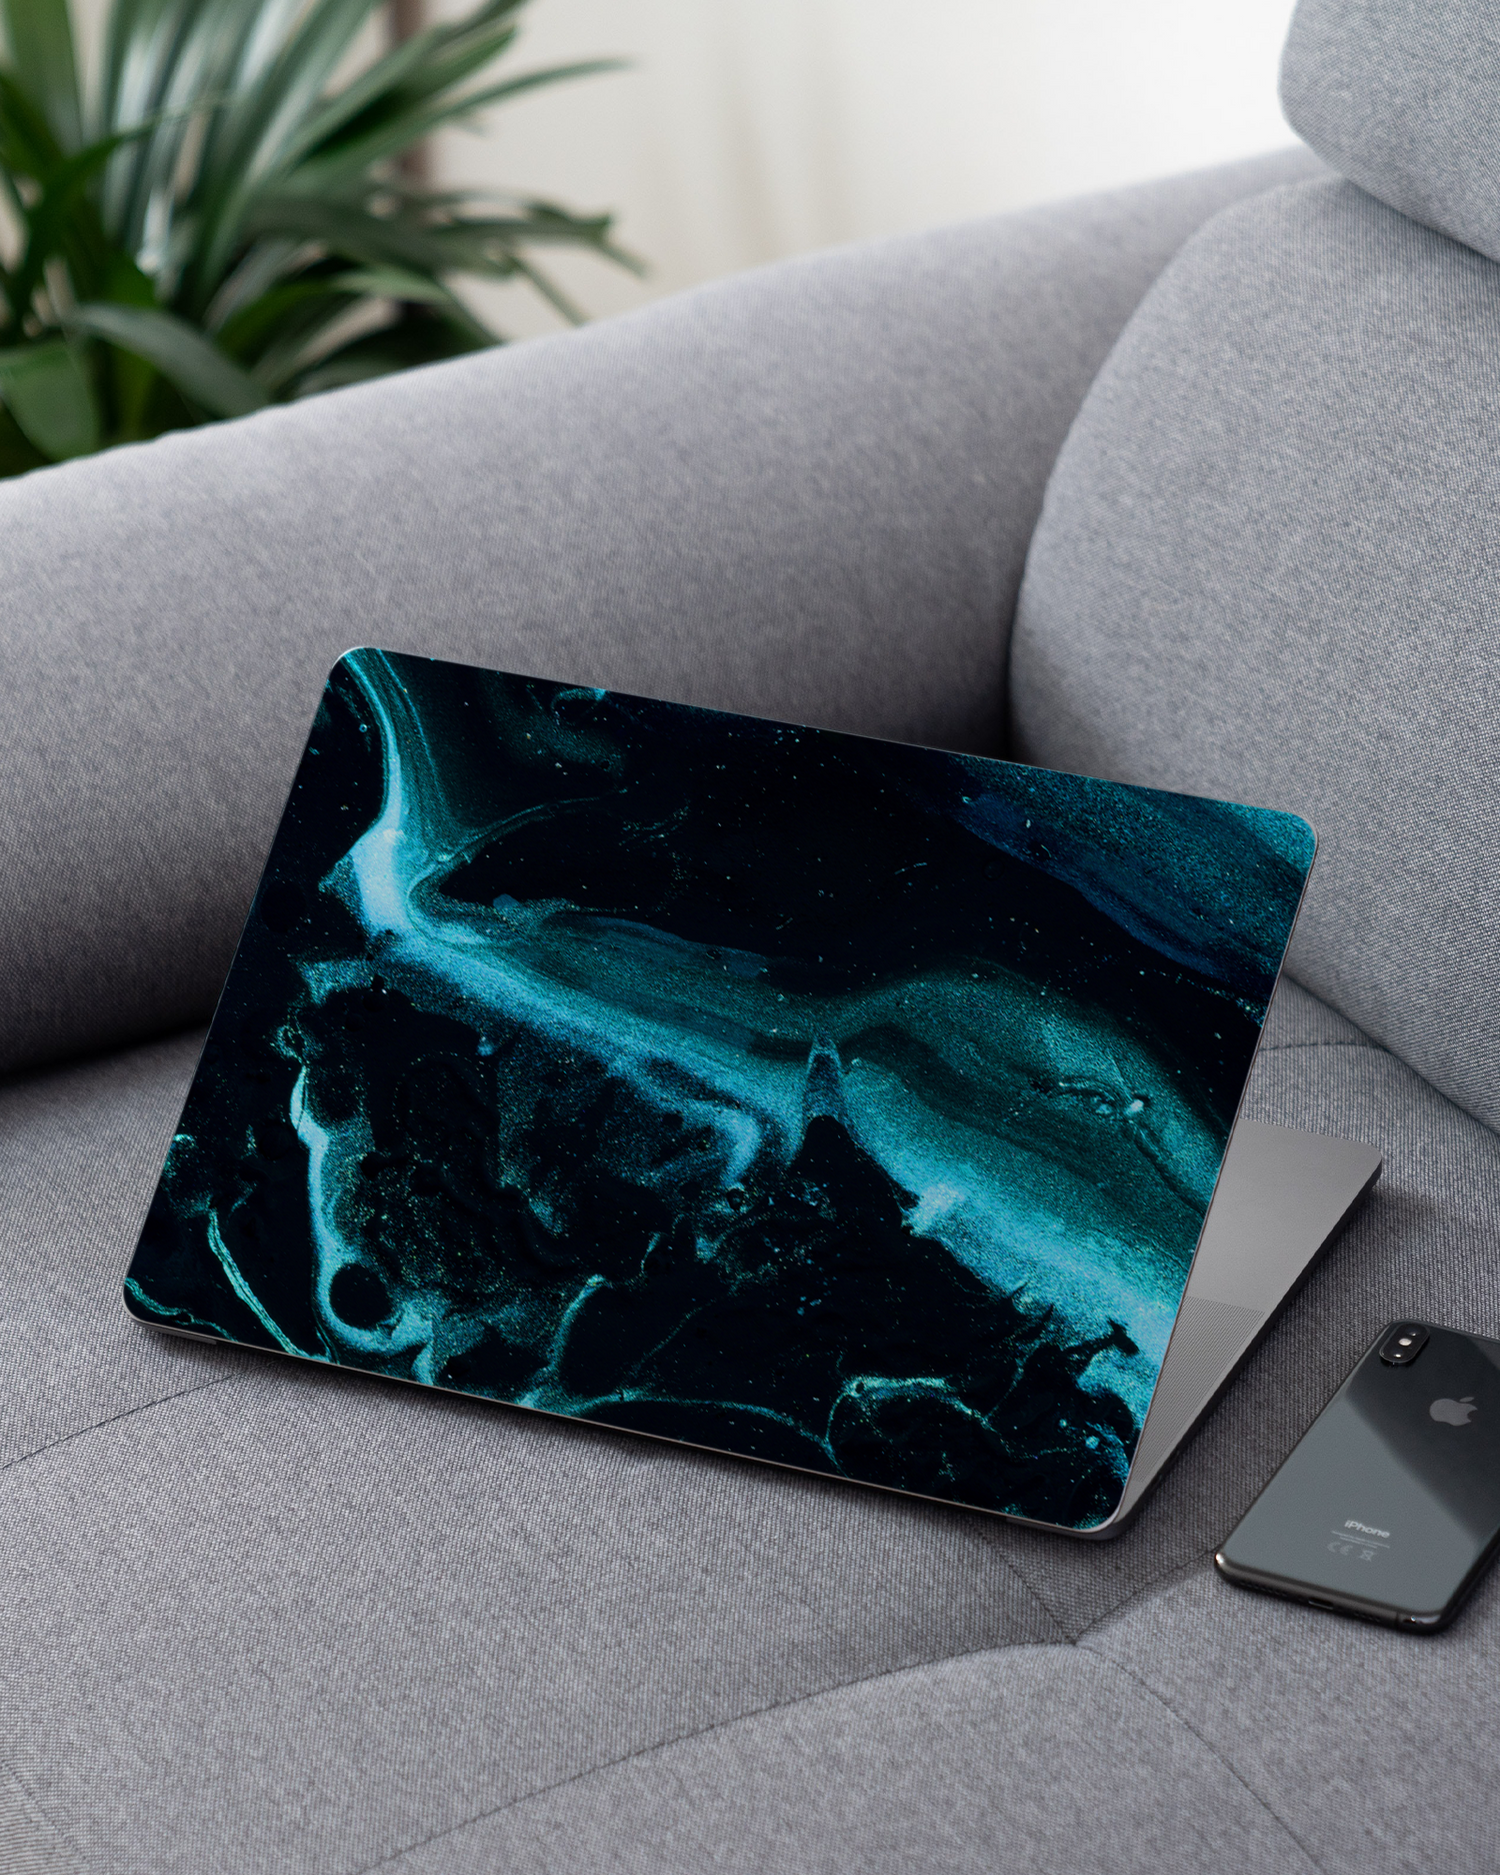 Deep Turquoise Sparkle Laptop Skin for 13 inch Apple MacBooks on a couch